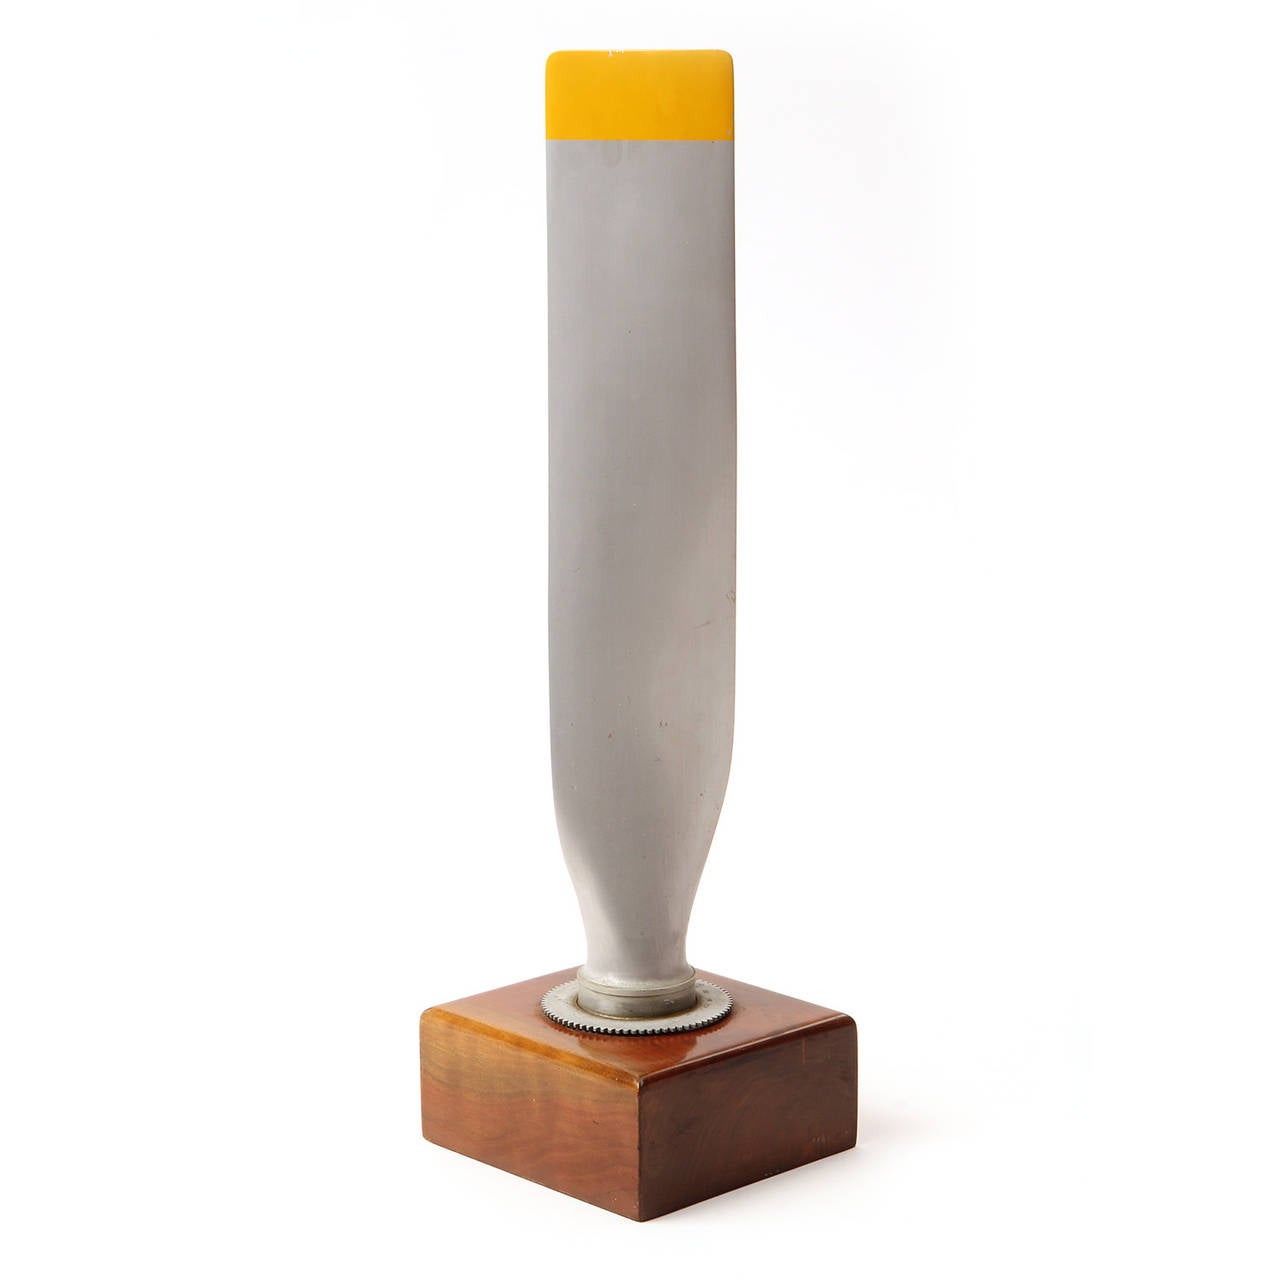 A striking and beautifully fabricated aluminum propeller blade with a lacquered yellow accent, finely mounted on a figured walnut base.